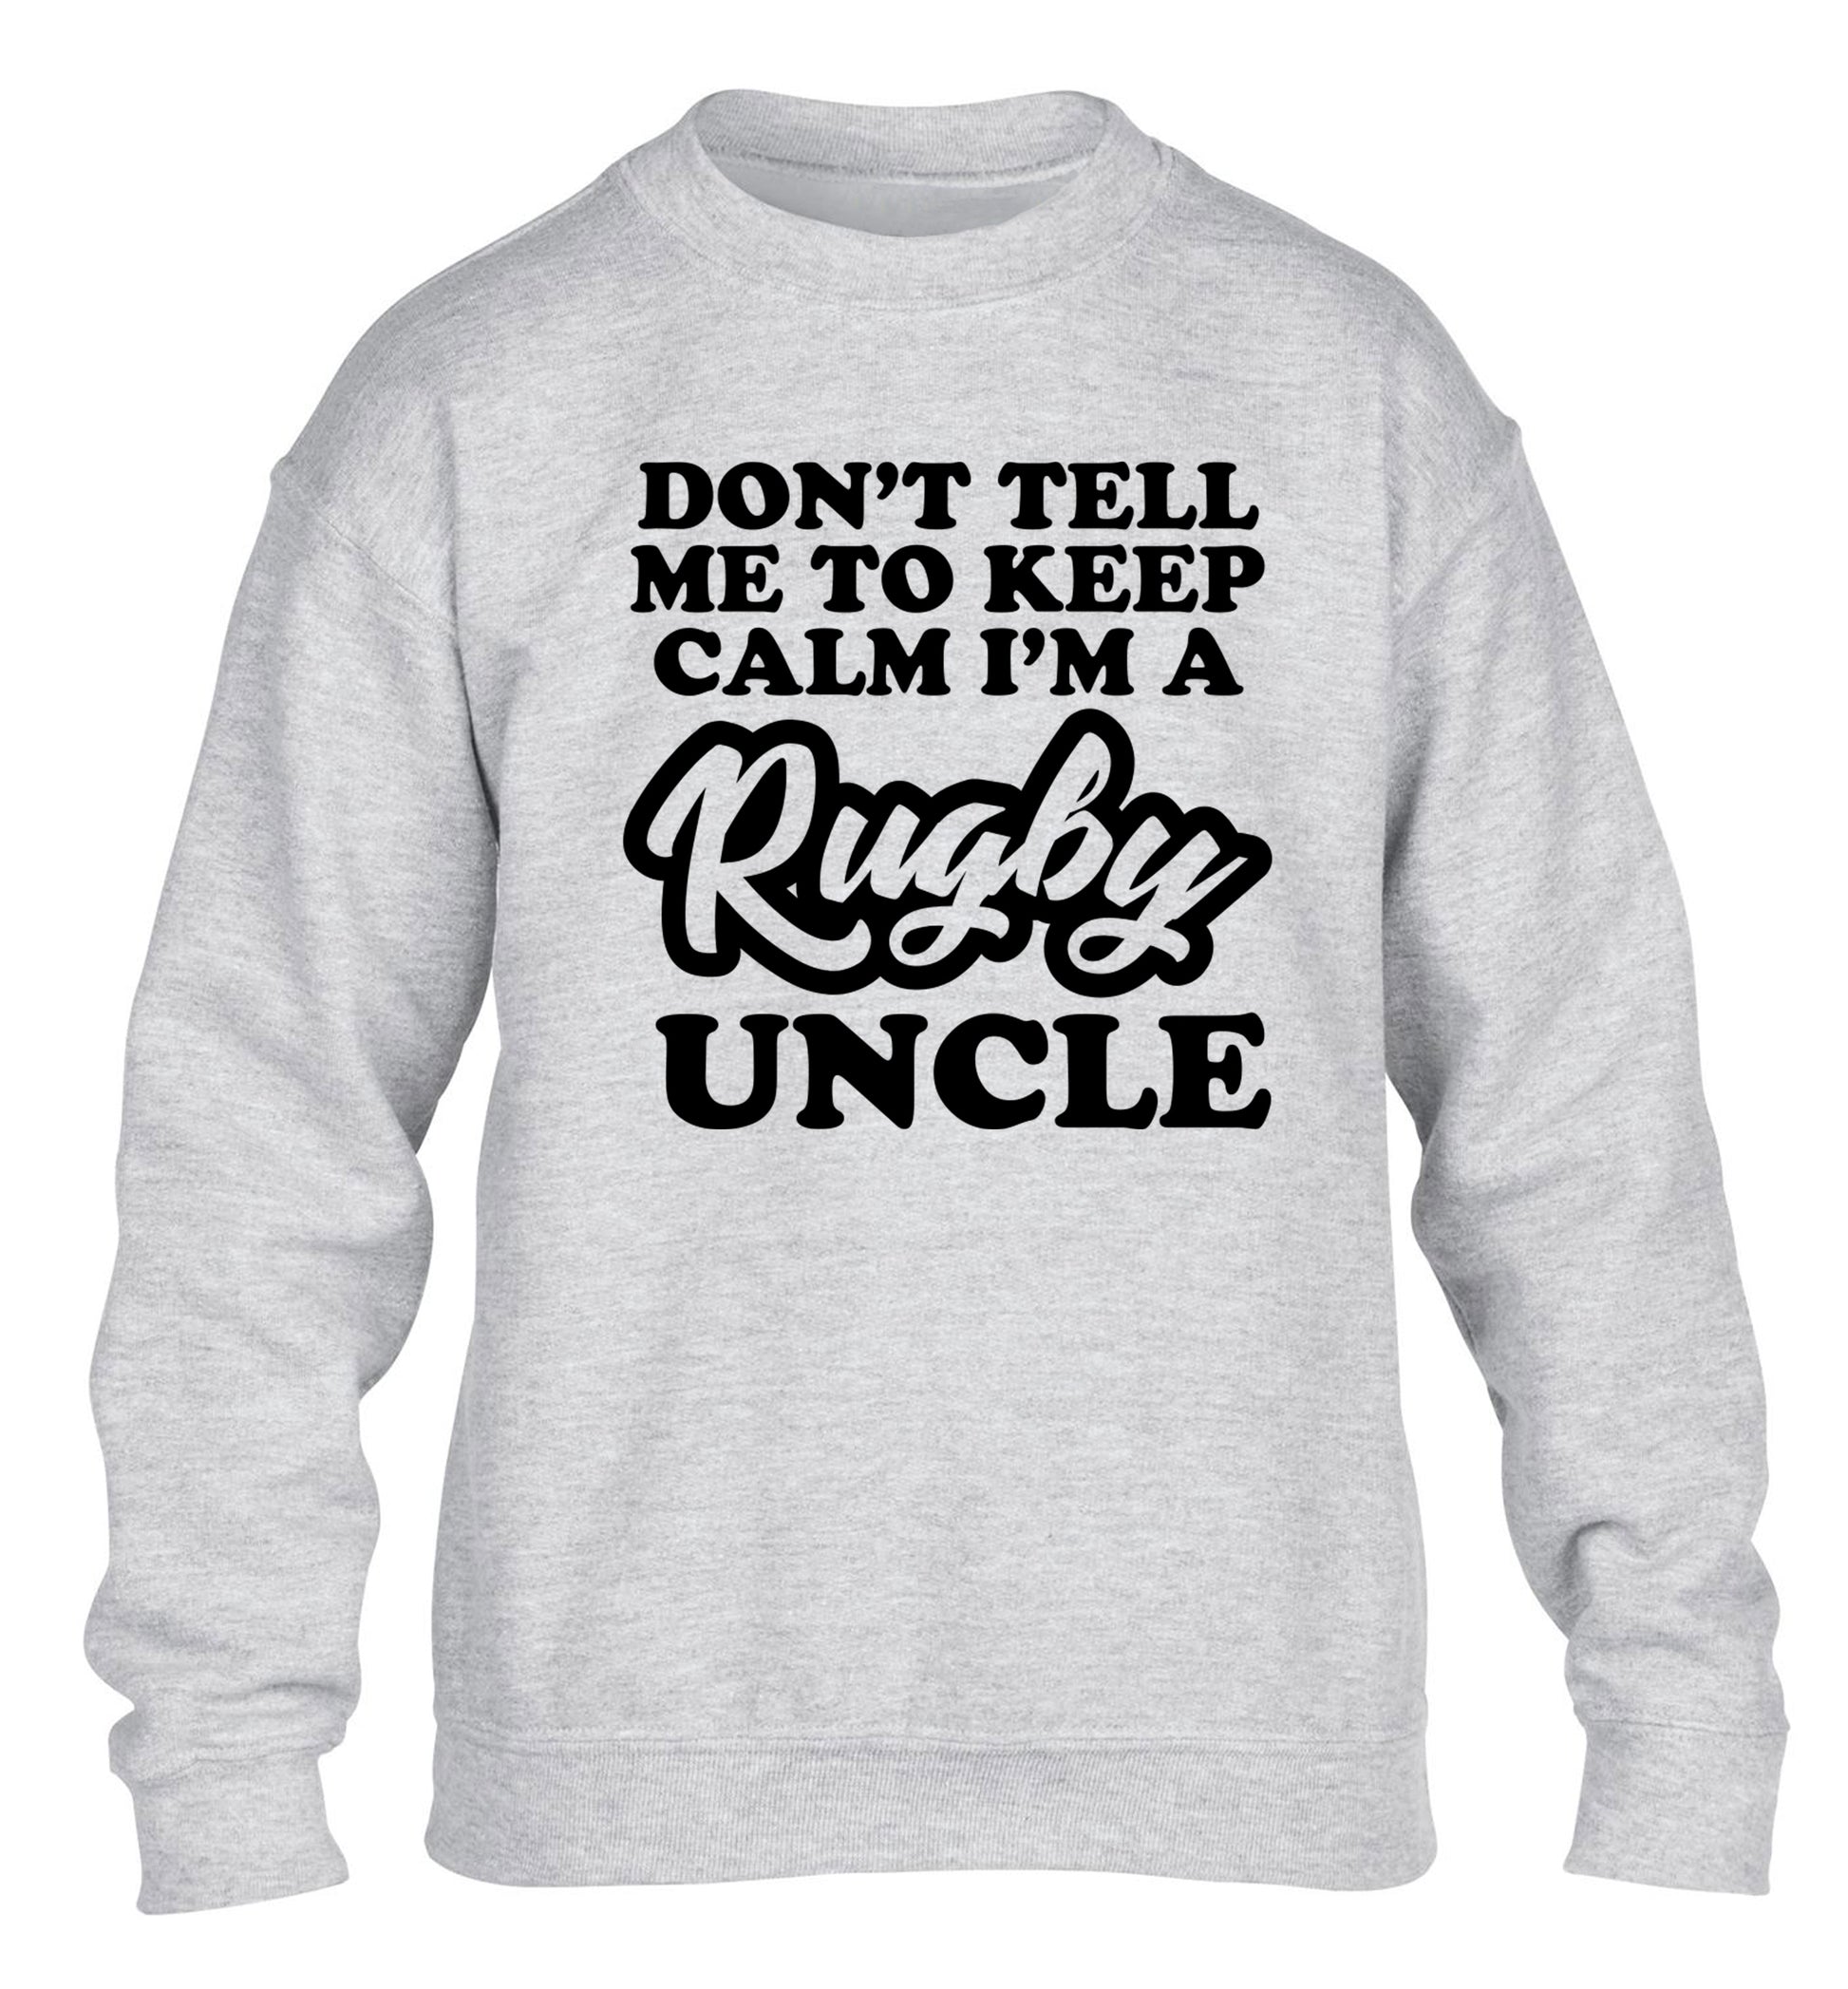 Don't tell me to keep calm I'm a rugby uncle children's grey sweater 12-13 Years